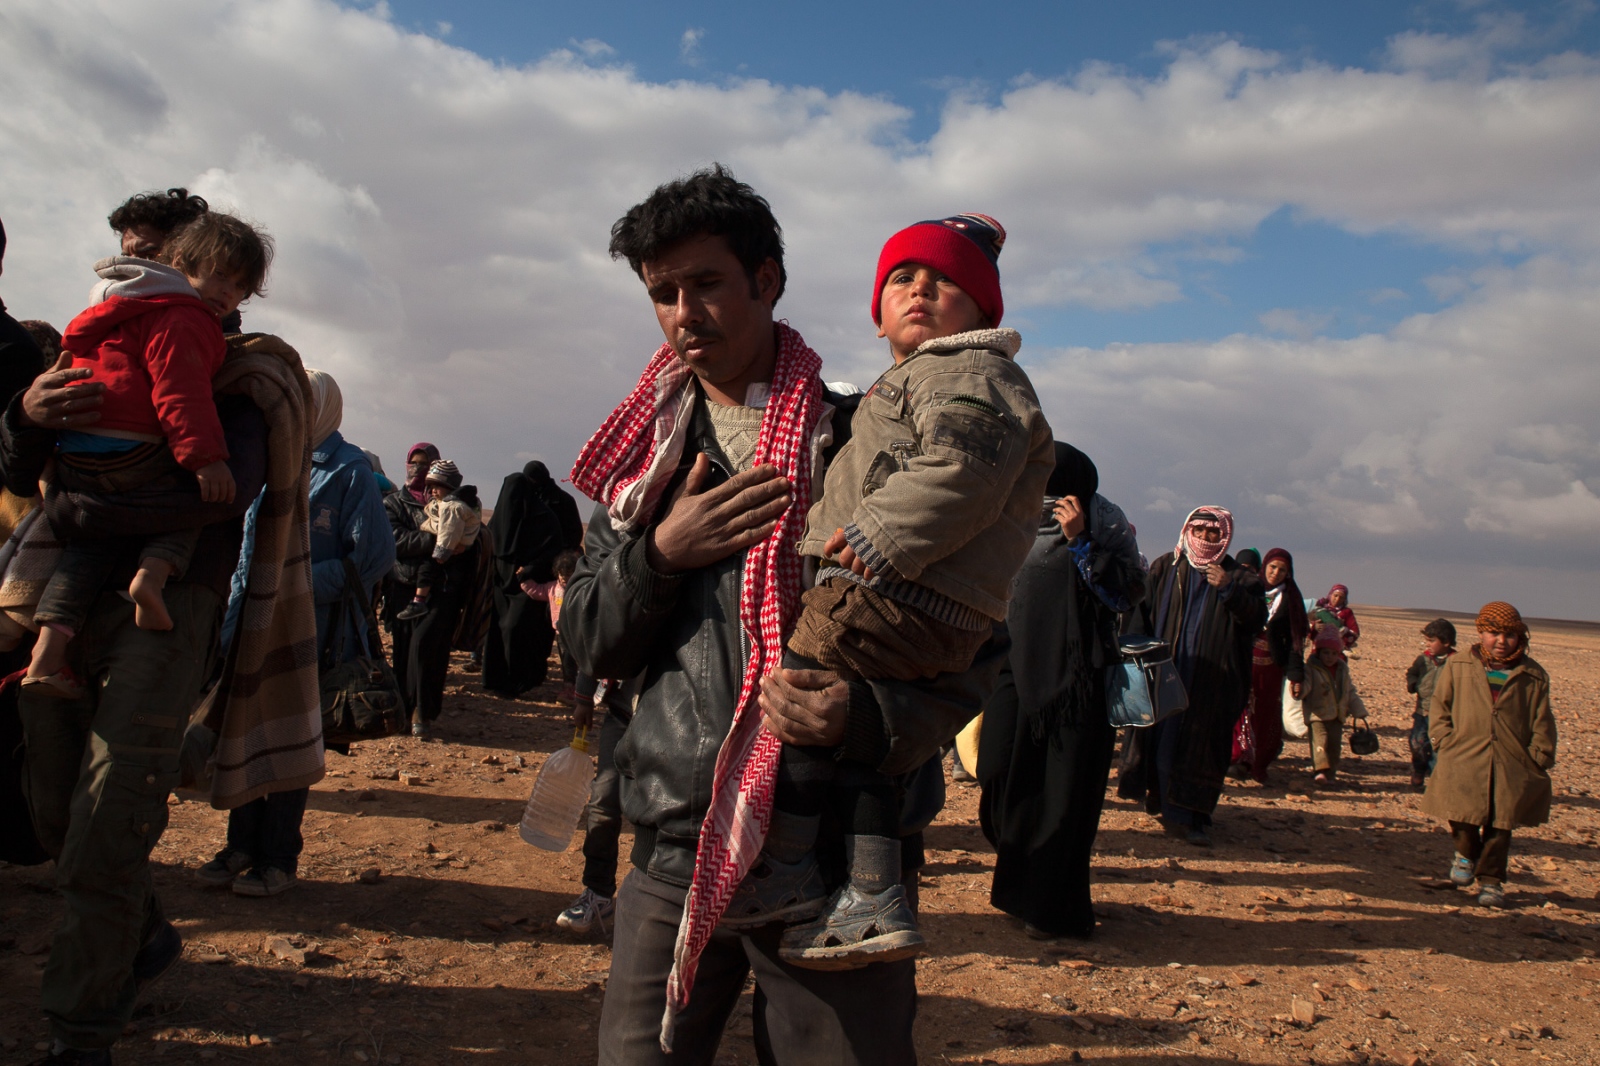 The Syrian Refugee Crisis - Some refugees paid hundreds of dollars to smugglers to...